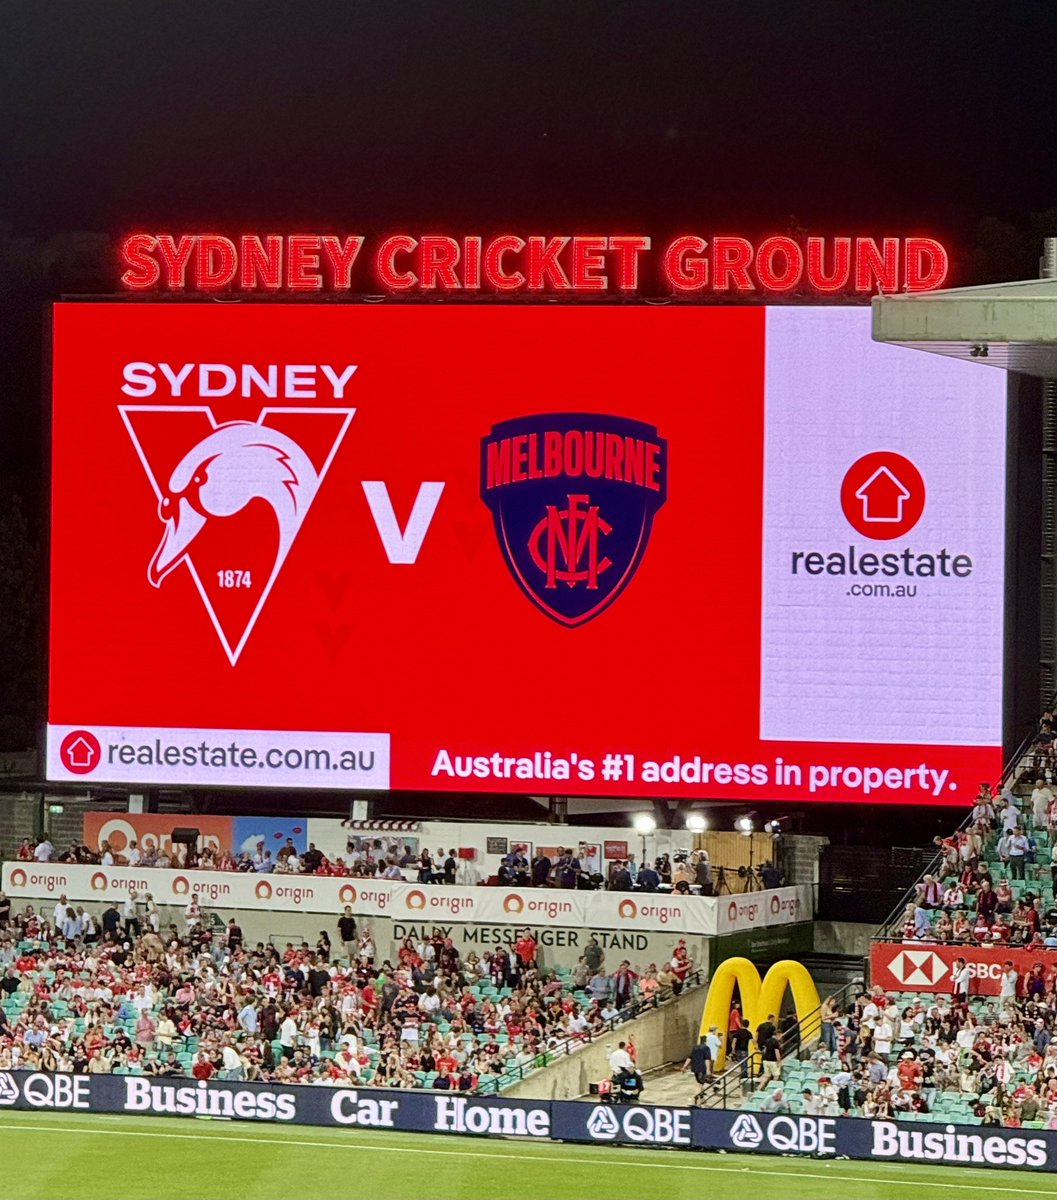 One of the best parts of my job at @alvarezmarsal is sharing experiences with our local teams around the world. Was fortunate in #sydney #australia to watch the opening round of the AFL season and 150th anniversary of the Sydney #Swans defeat the #melbourne #demons